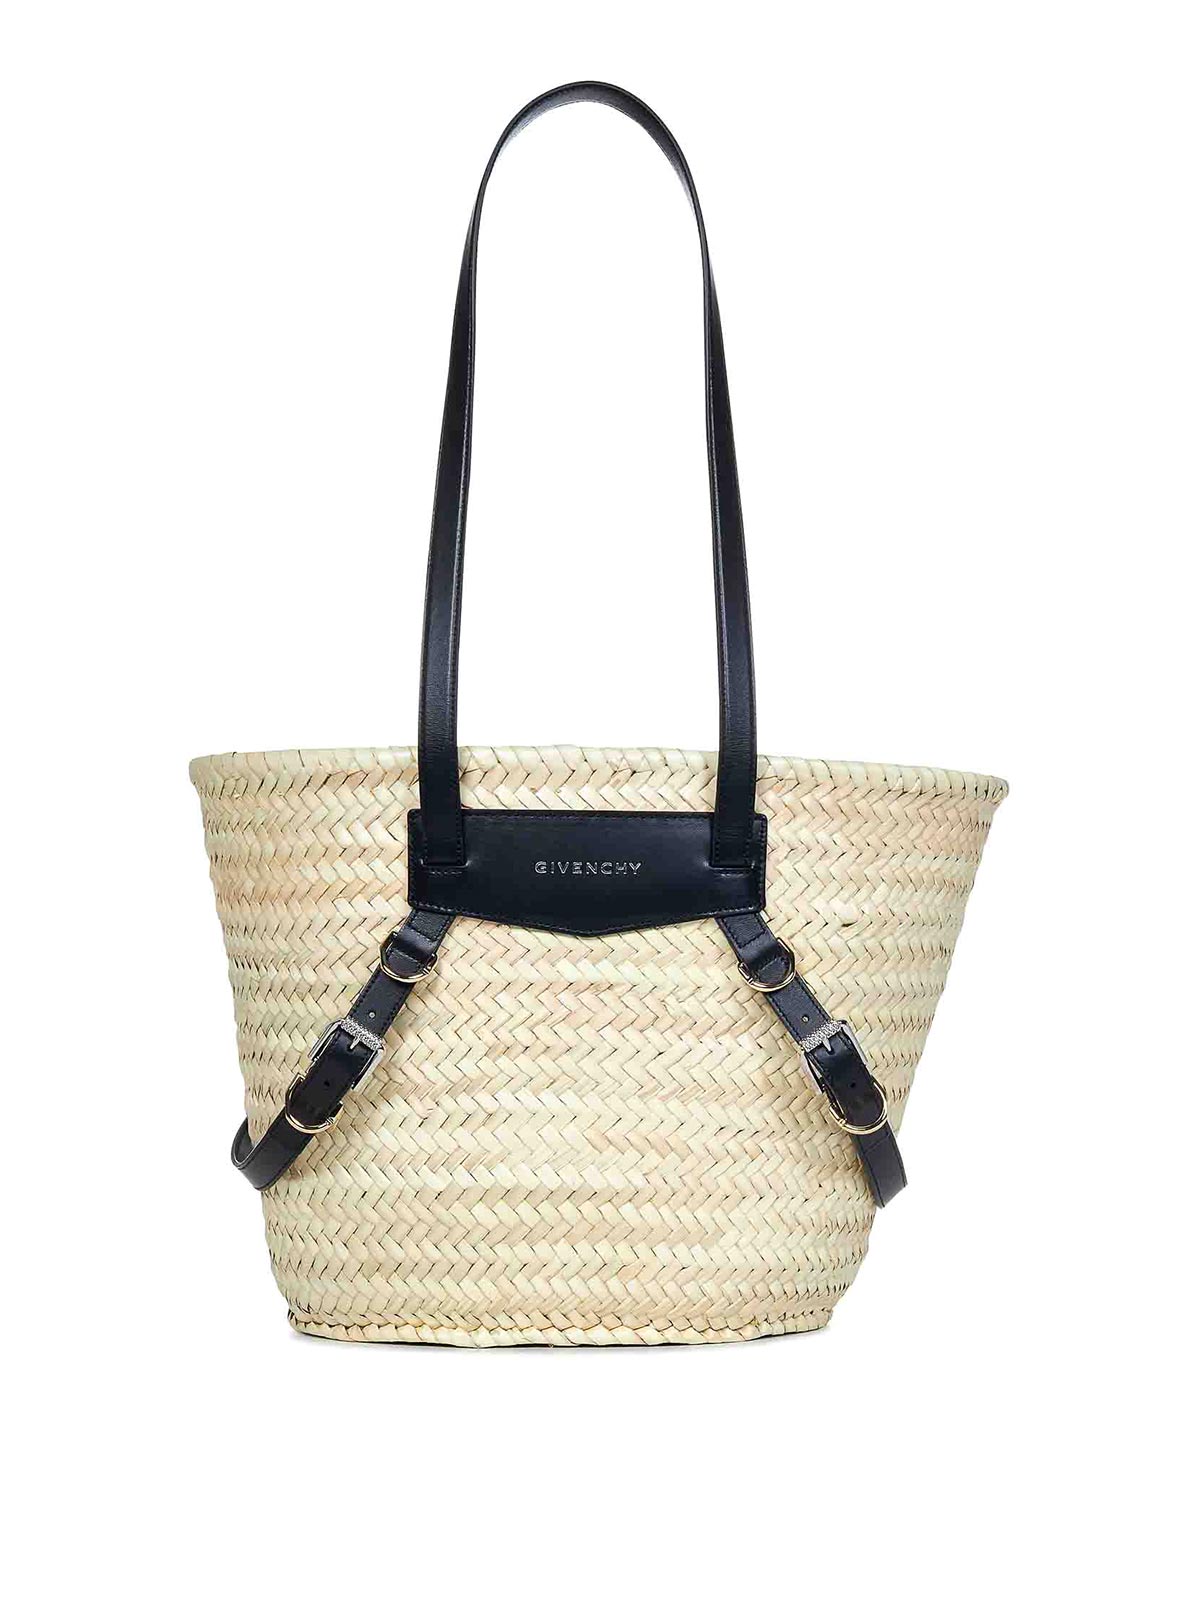 Givenchy Raffia Basket Bag With Leather Handles In Black